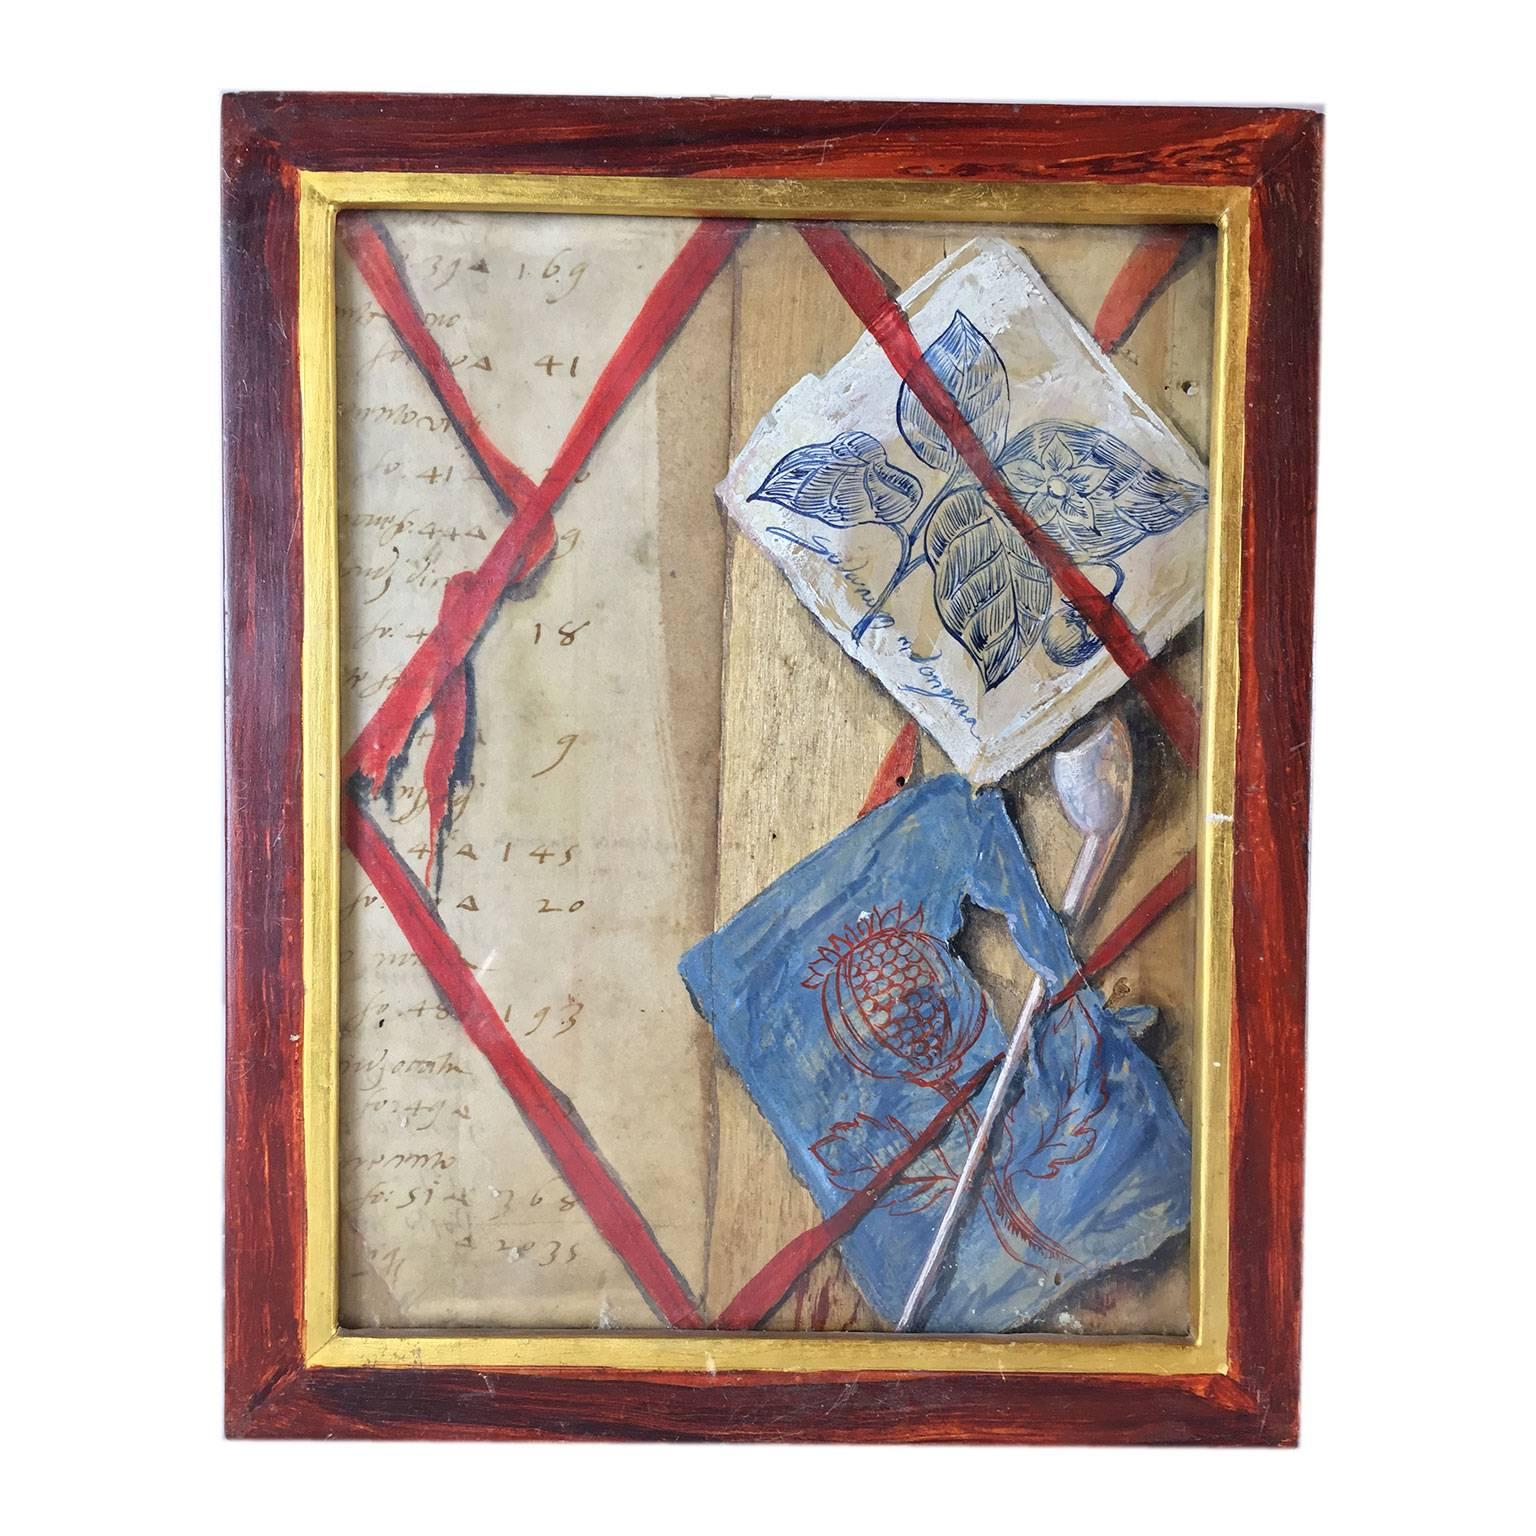 Six Trompe l'Oeil, a group of six paintings on fir-tree panes with red frames, pen, ink, and watercolour on paper. 
These are six delightful panels, displaying collections of paper objects designed to deceive both the eye and the touch, consisting